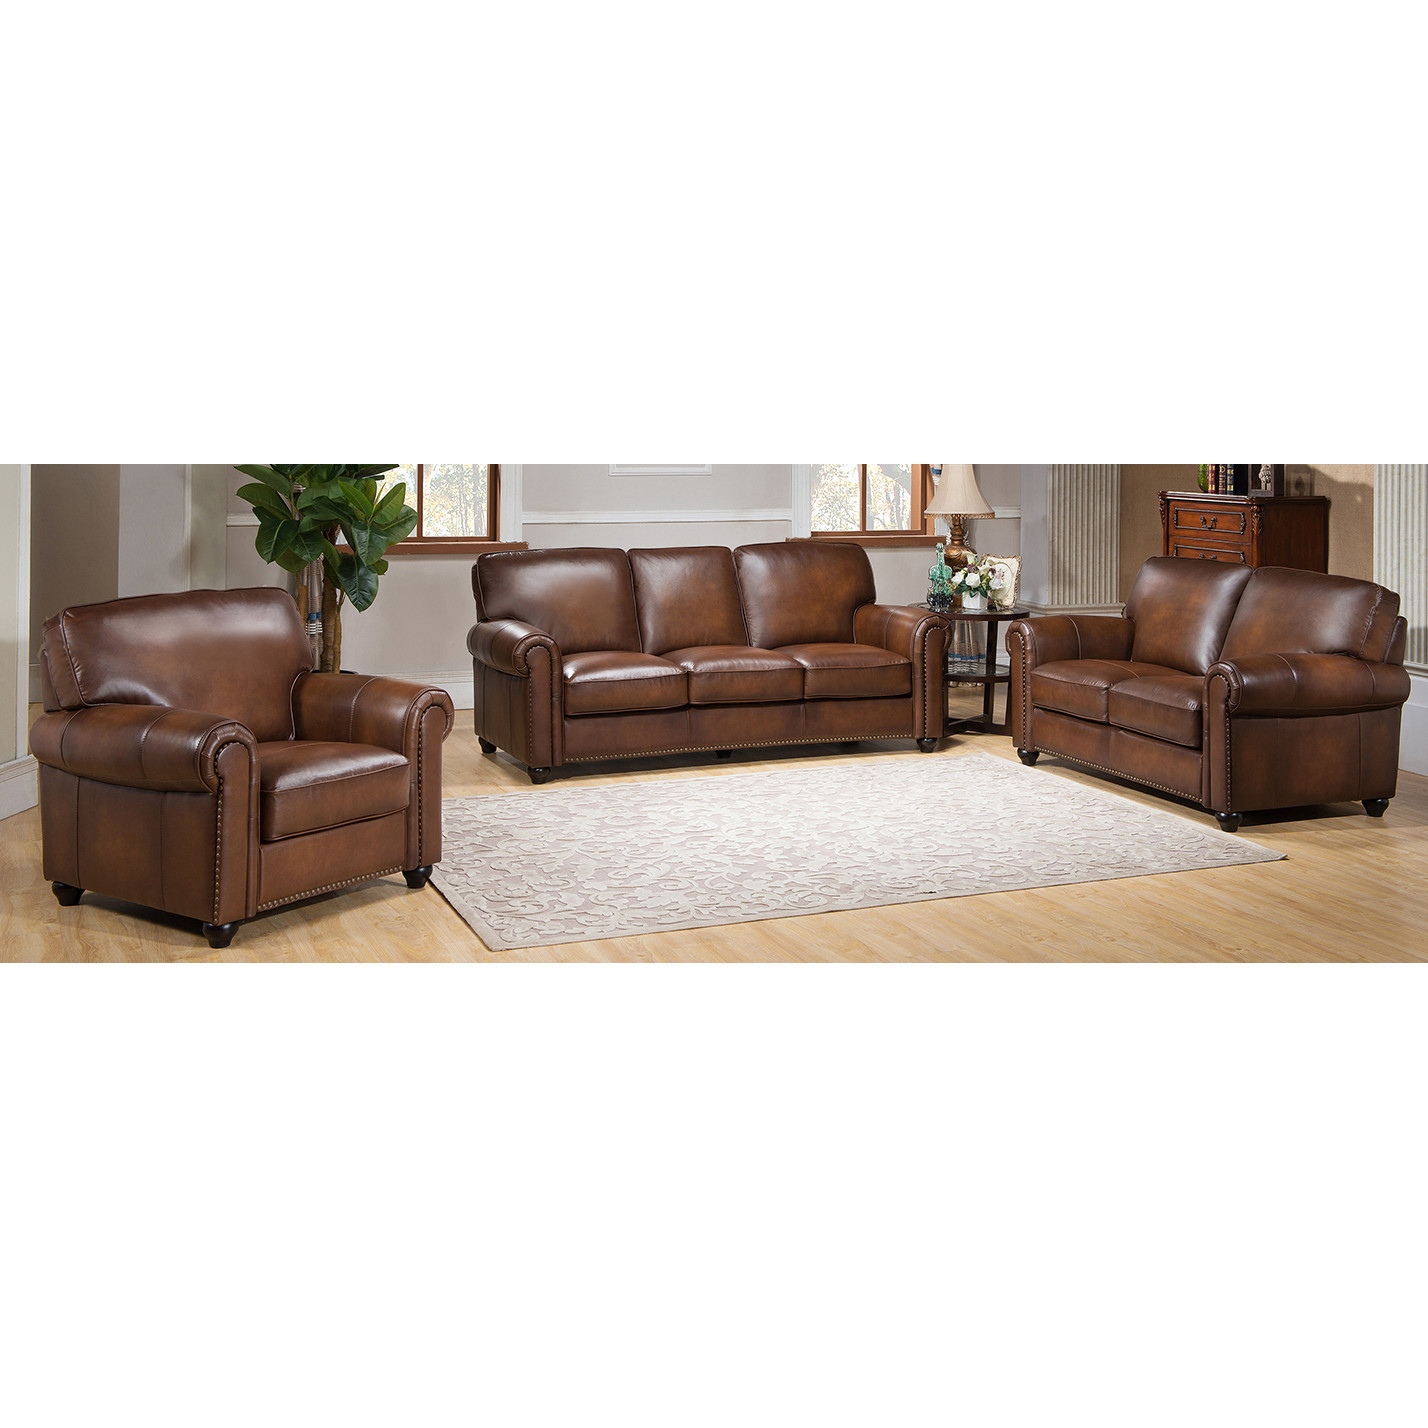 Best ideas about 3 Piece Living Room Set
. Save or Pin Amax Aspen 3 Piece Leather Living Room Set Now.